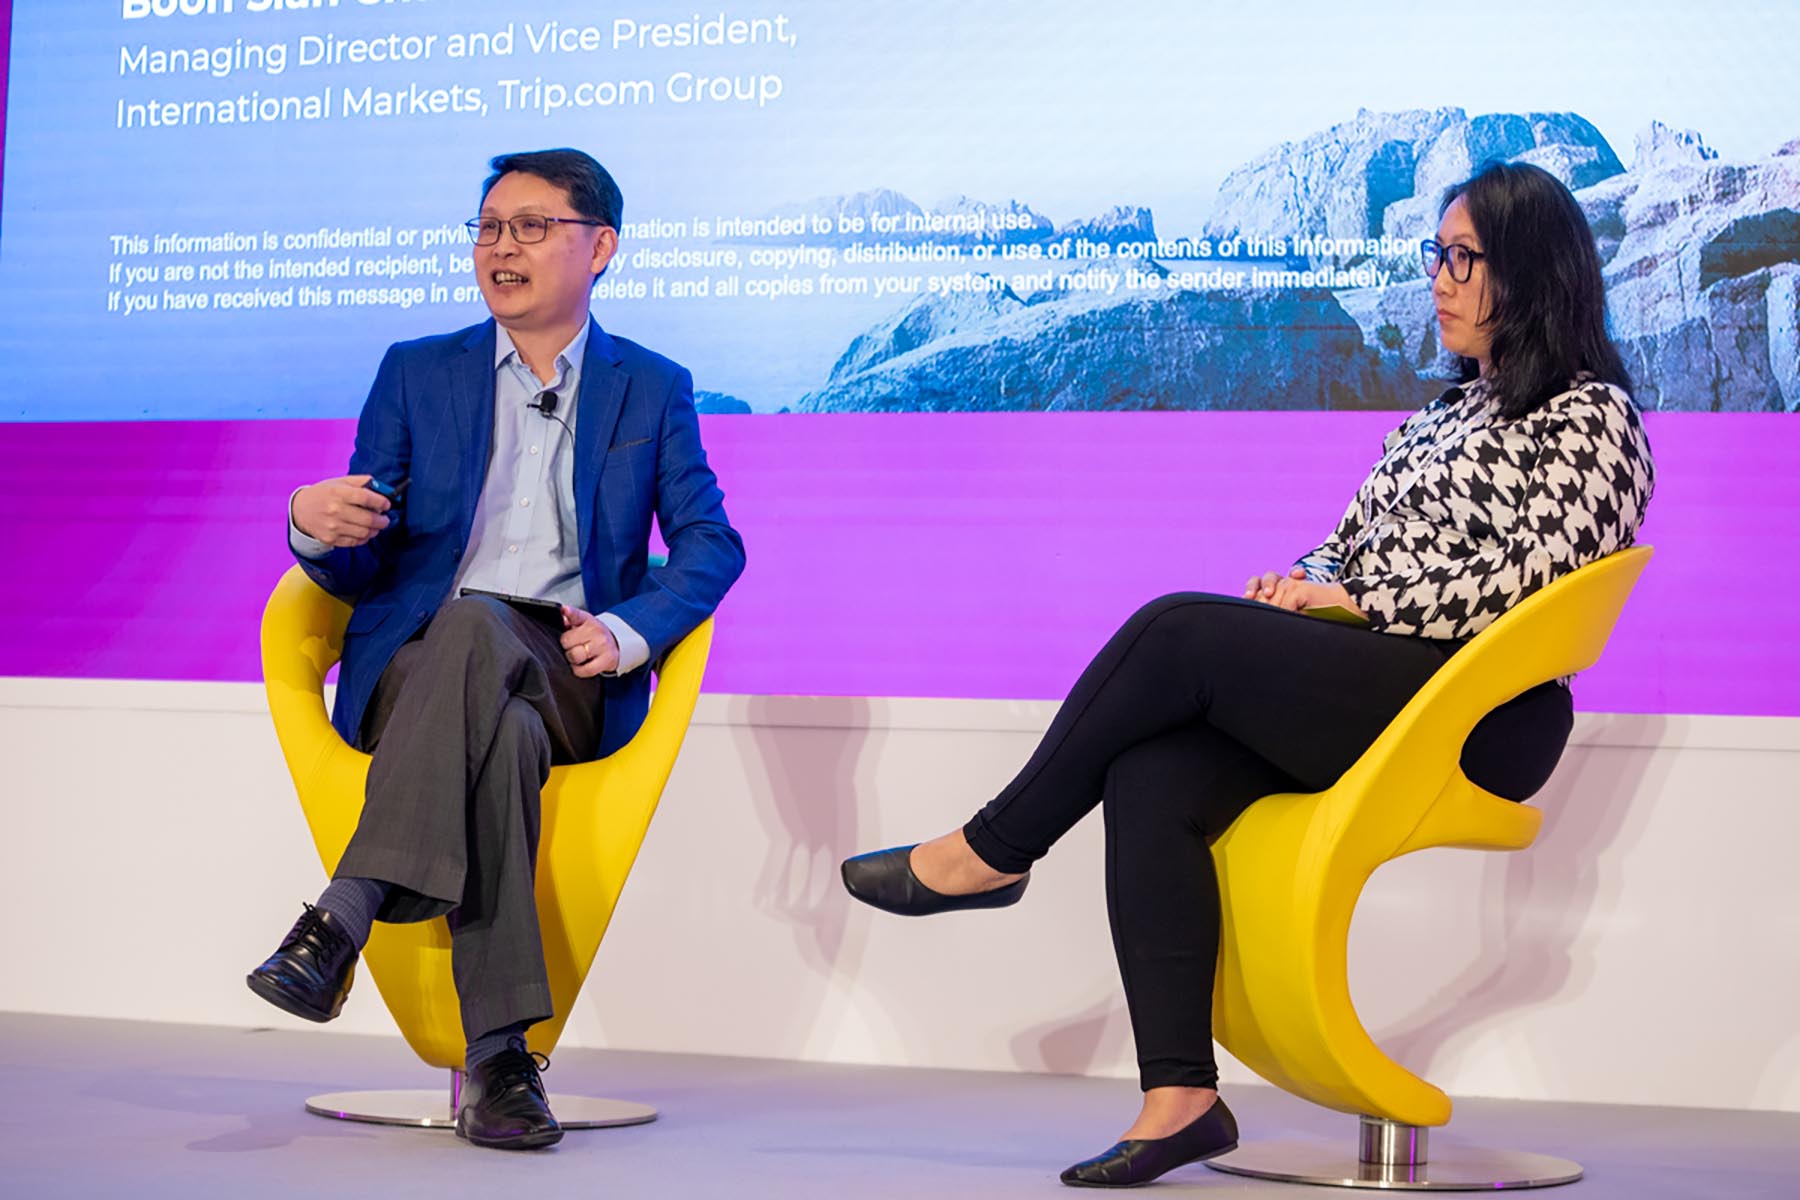 Boon Sian Chai, managing director and vice president of international markets for Trip.com at Skift Global Forum East in Dubai.